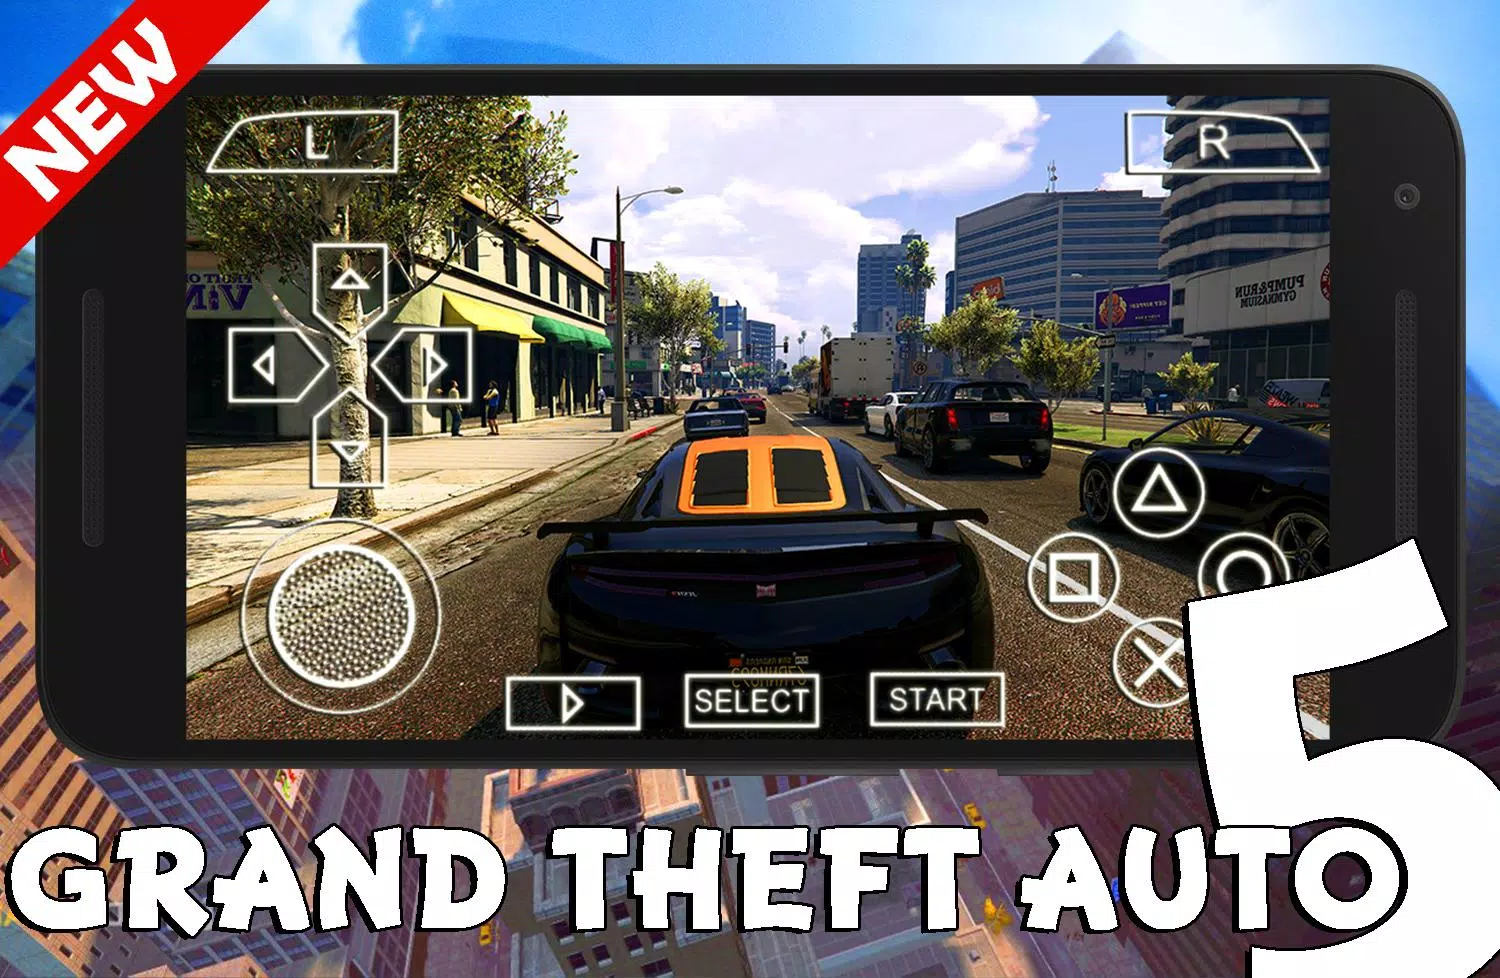 Grand theft auto v download ppsspp